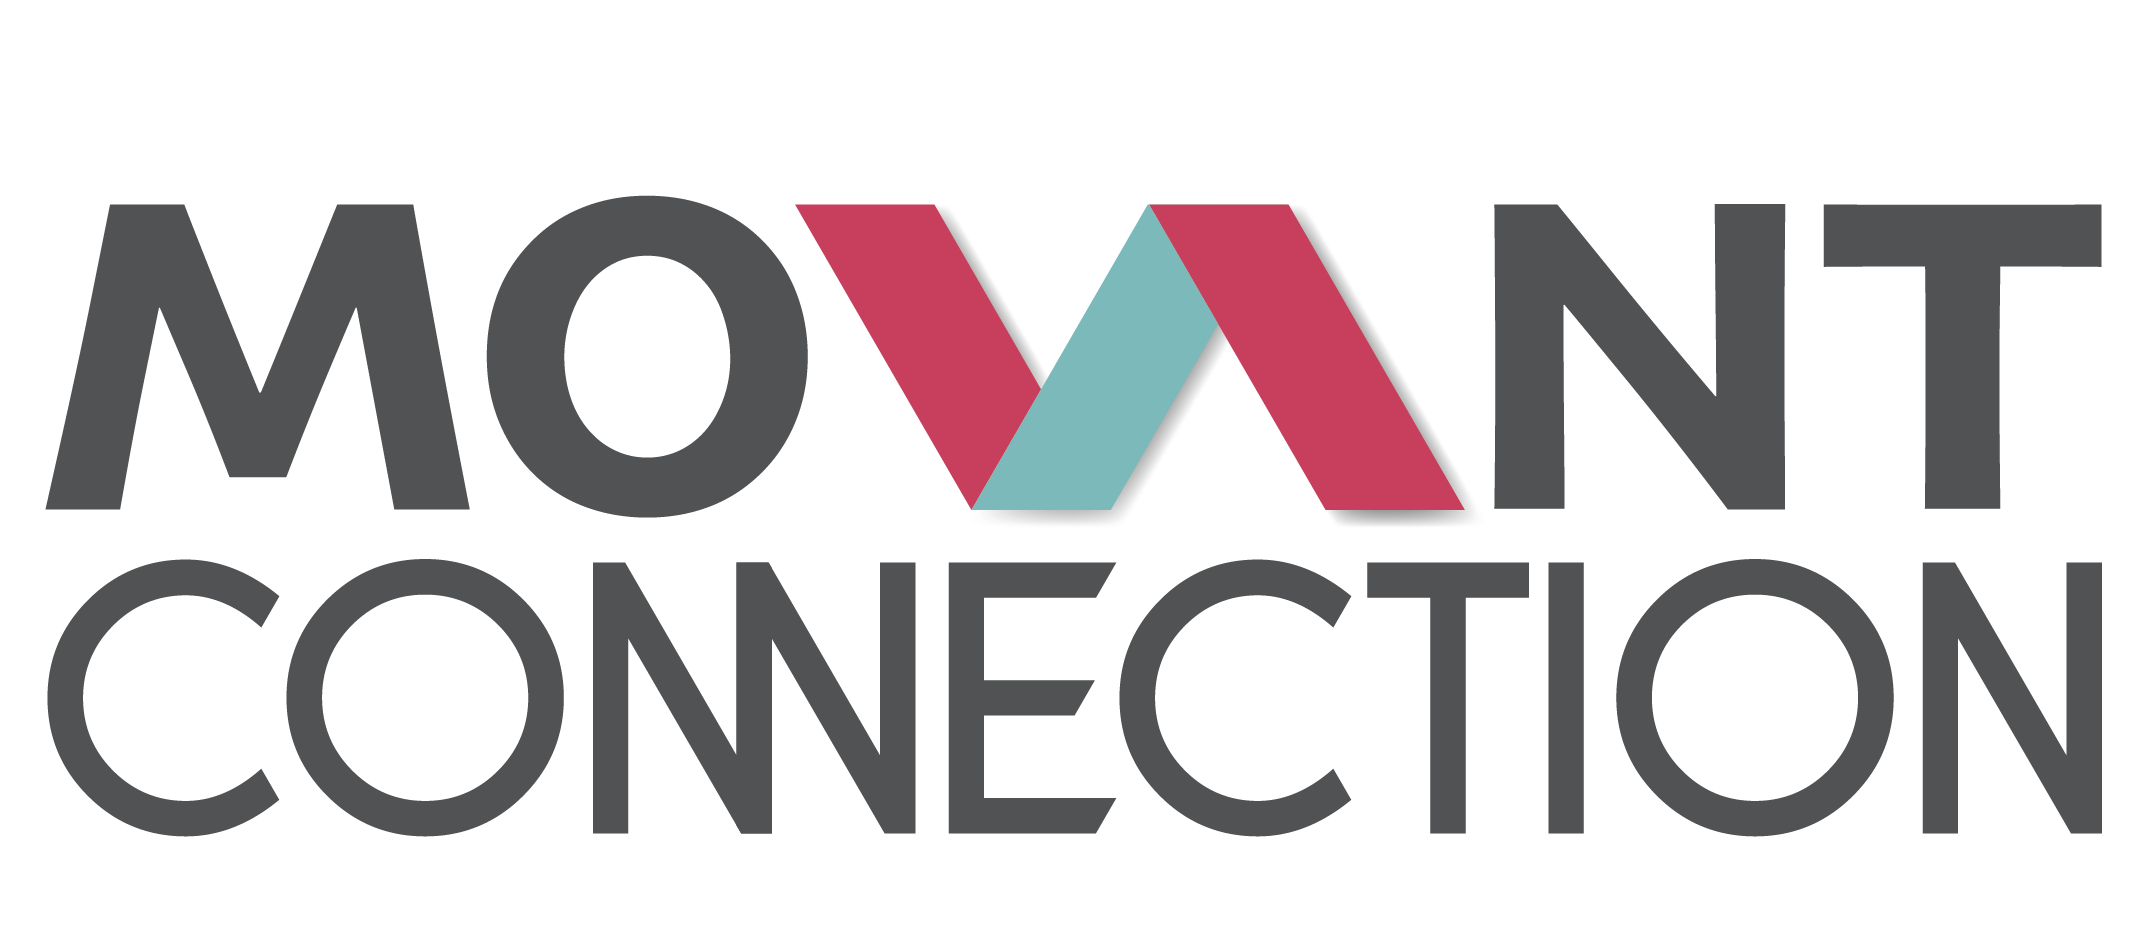 Movant ConnectionMovant Connection